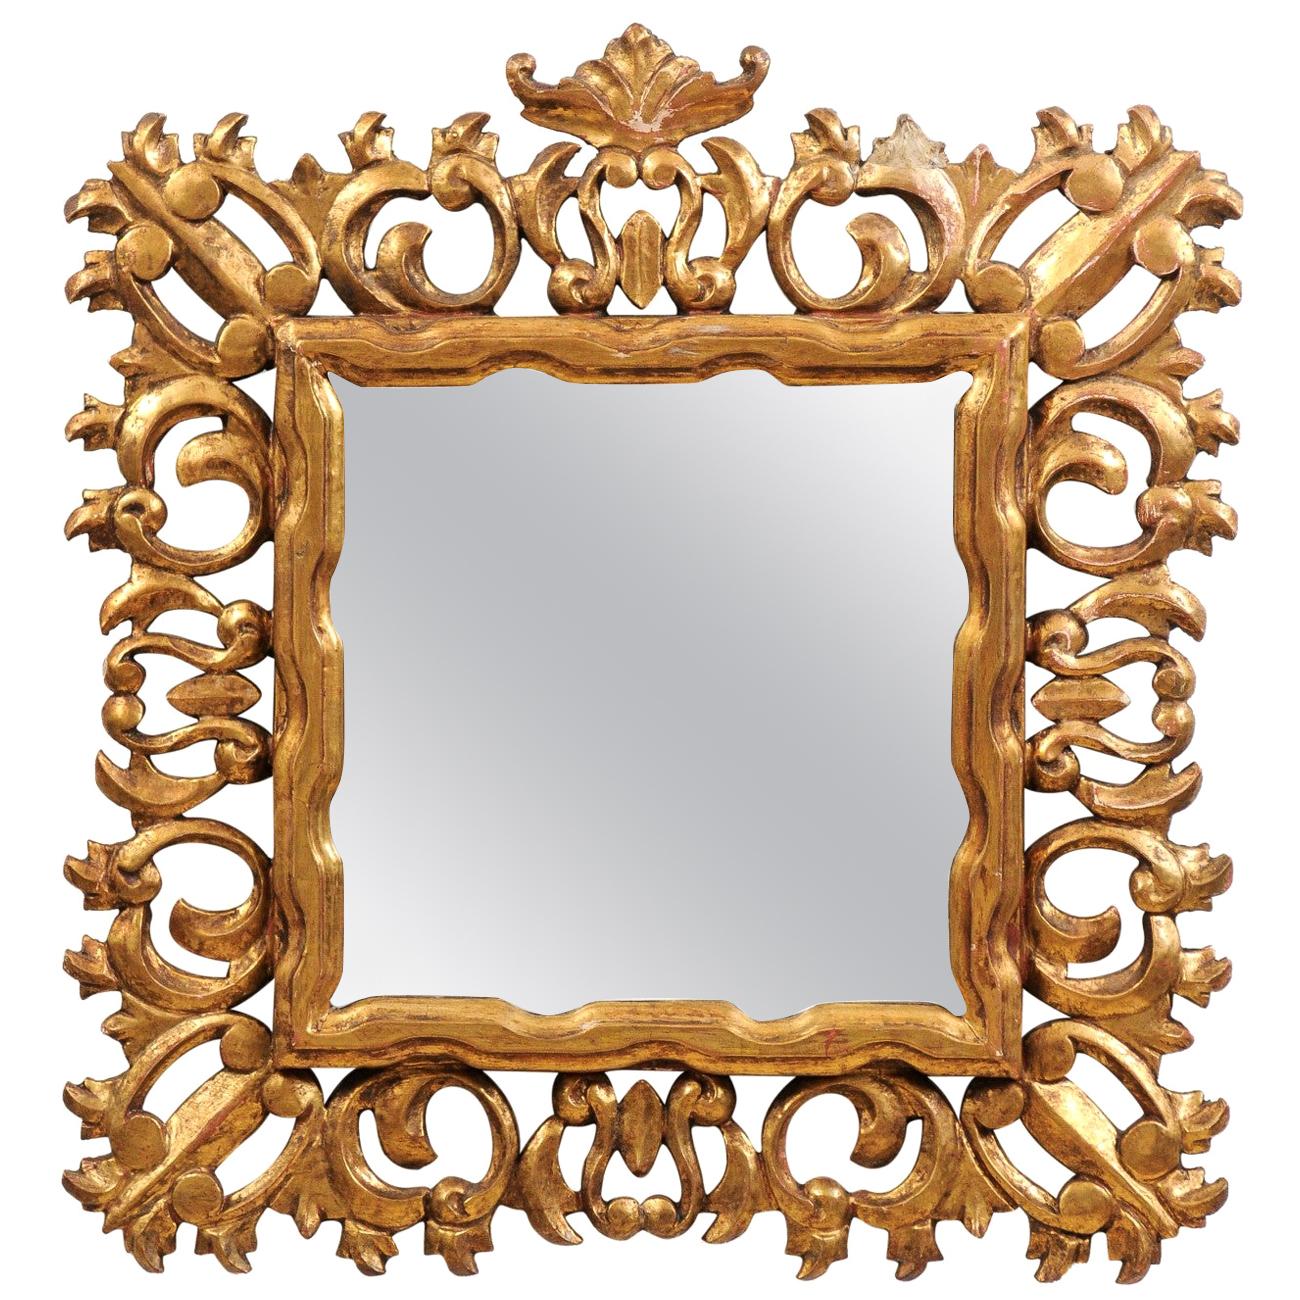 Florentine 20th Century Carved Giltwood Mirror with C-Scrolls and Foliage Motifs For Sale